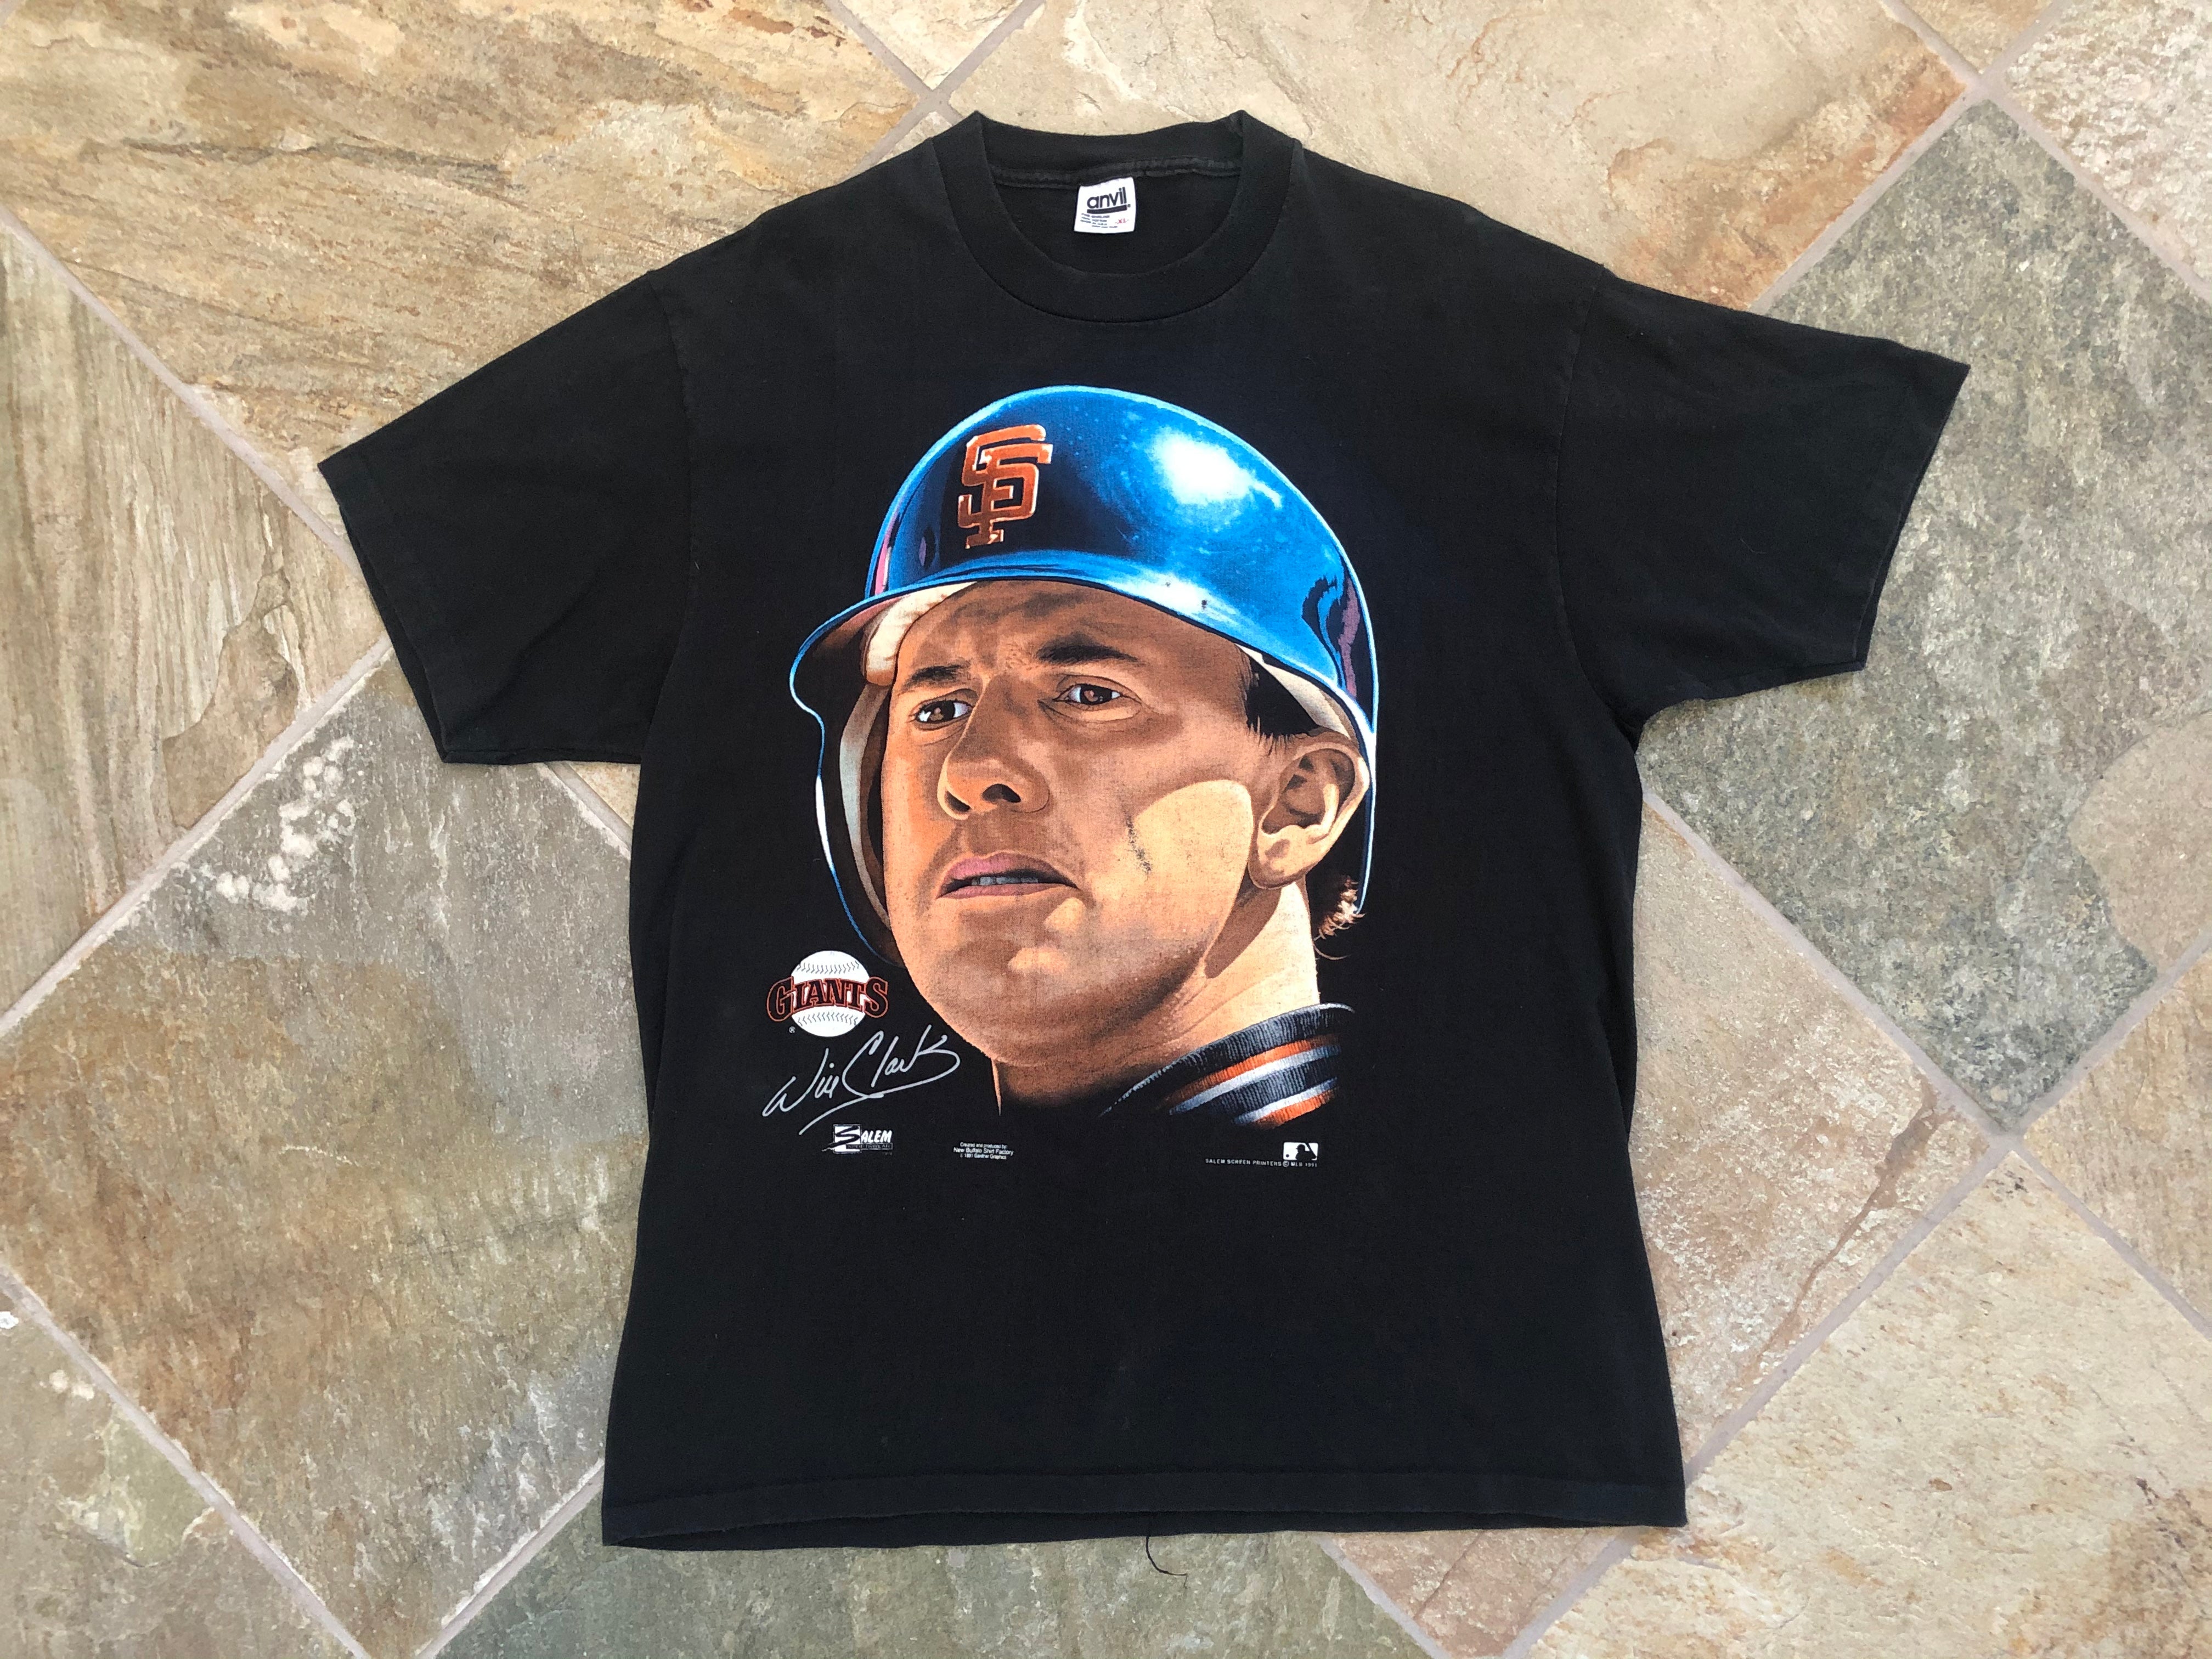 Callahansupplyco San Francisco Giants Baseball Player #27 V-Neck T-Shirt Size Large Made in U.S.A..